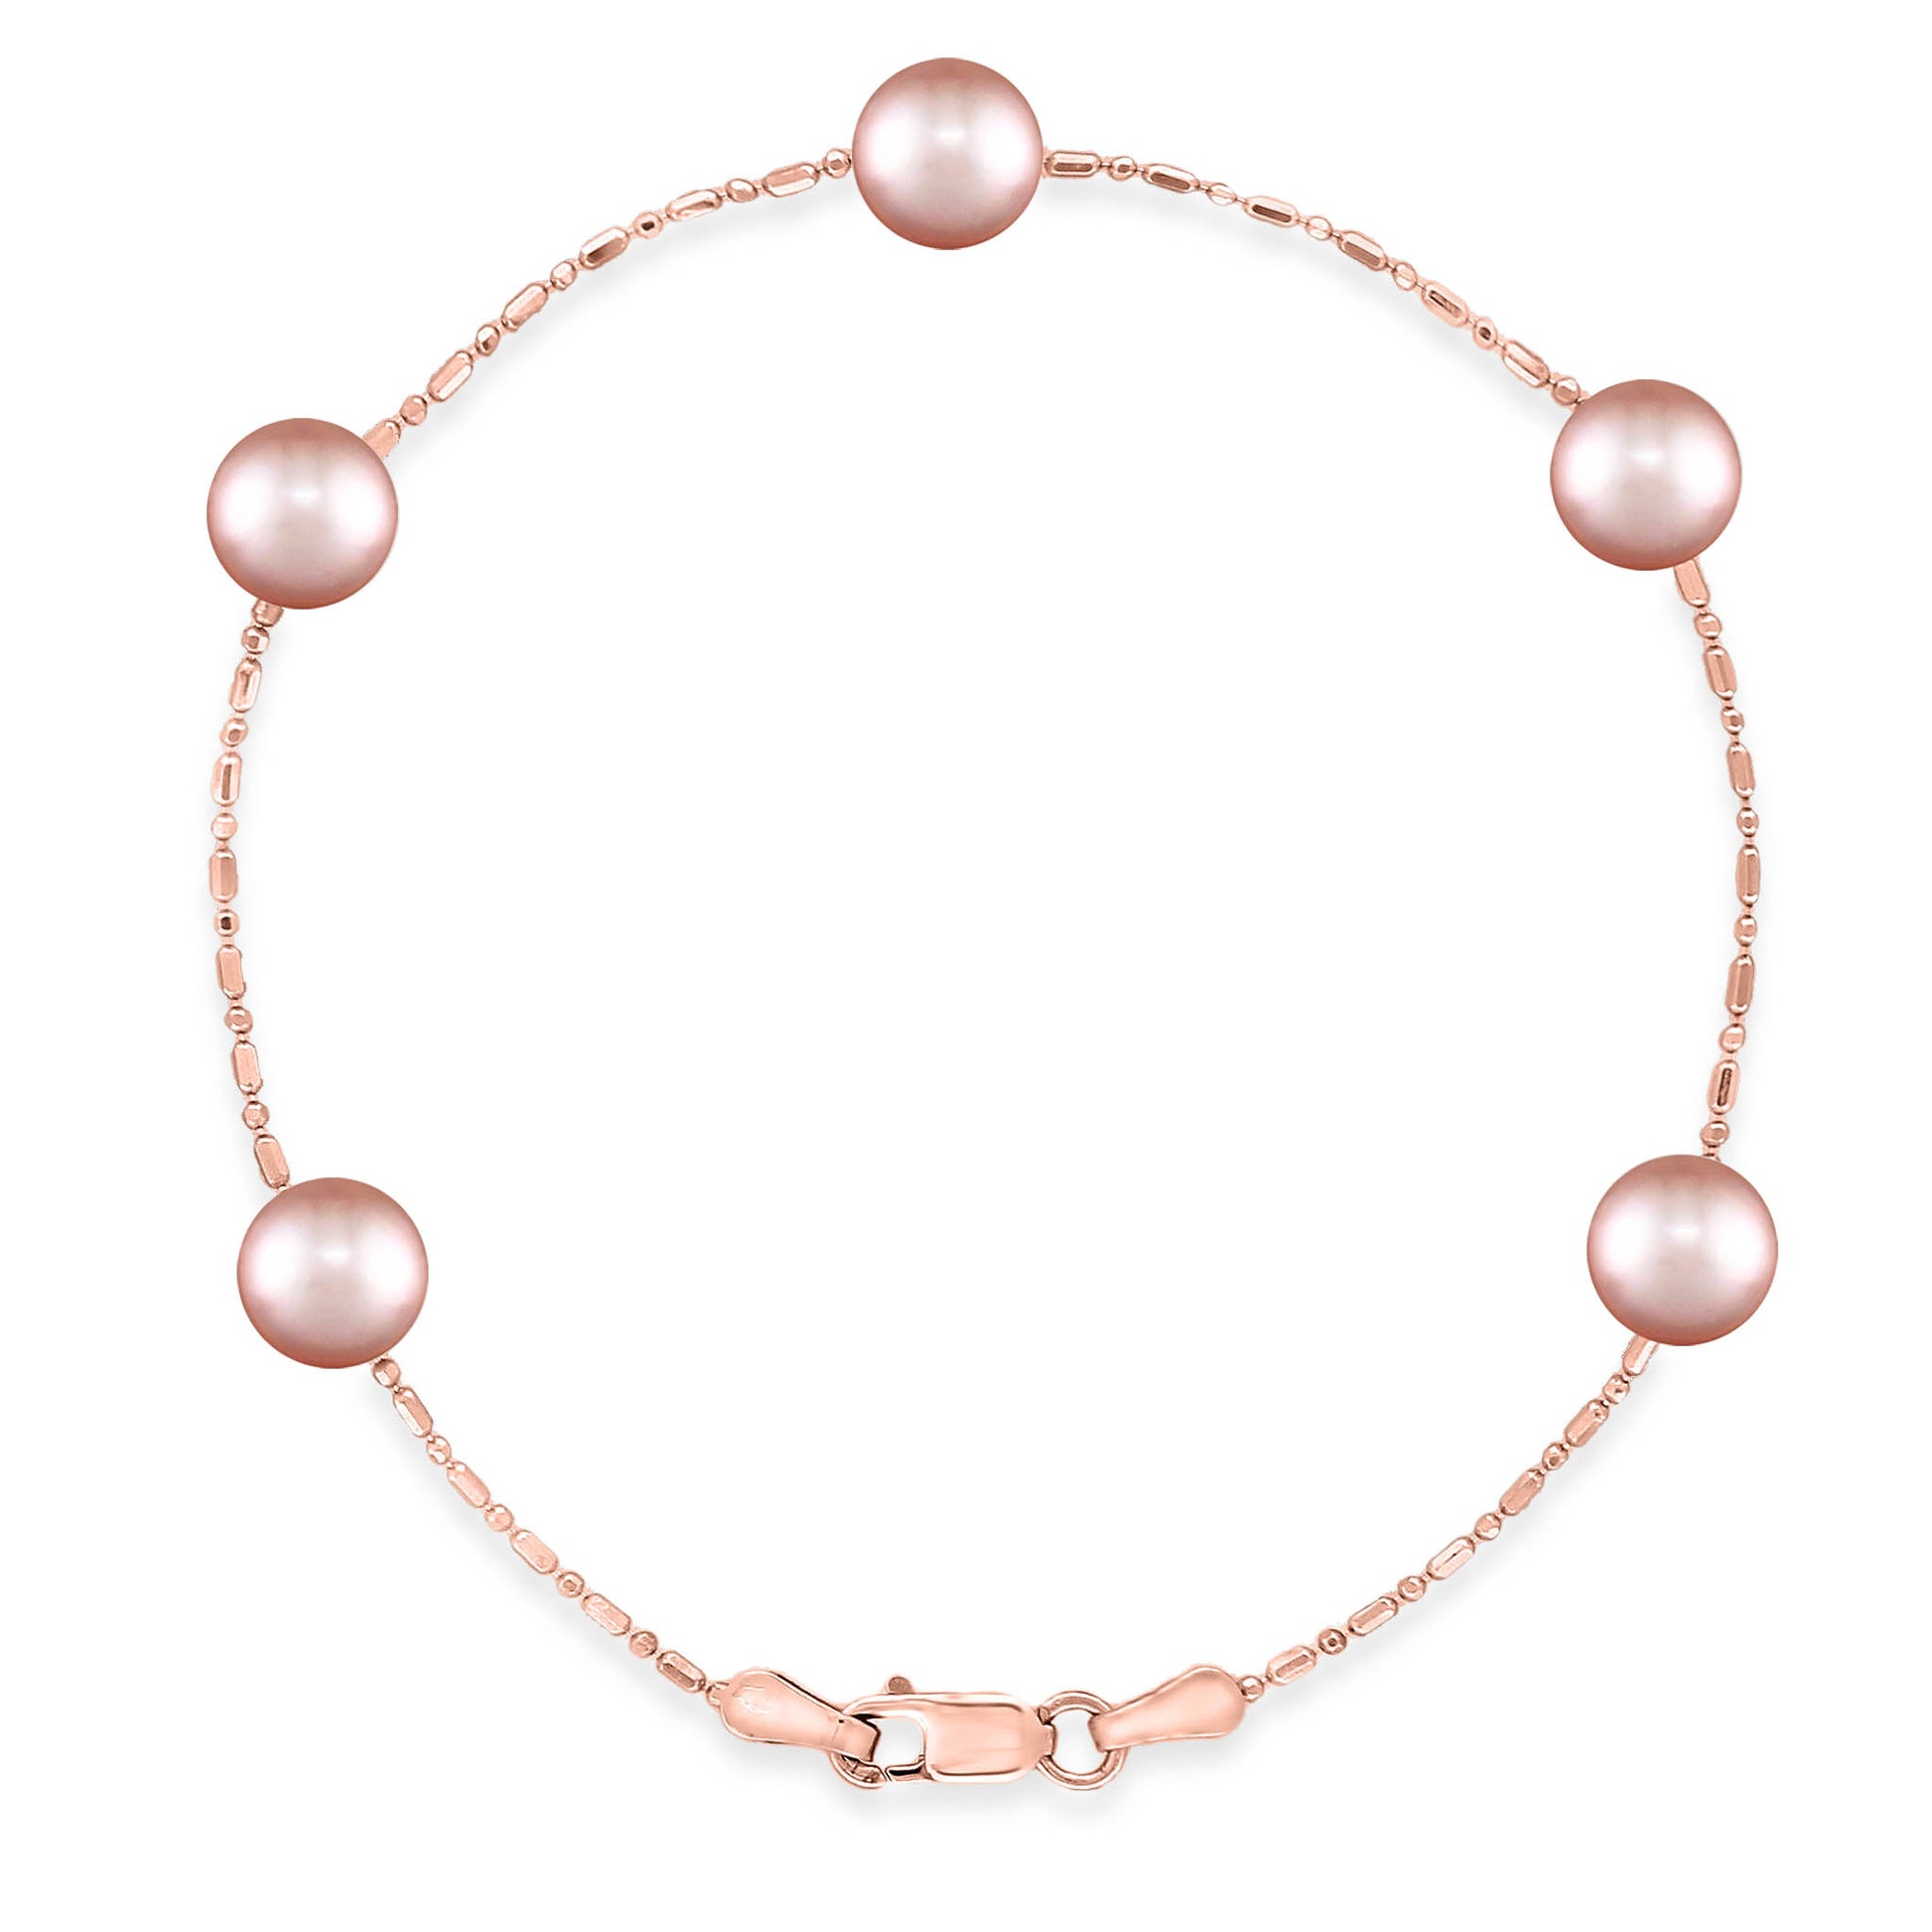 41391 - 14K Rose Gold - Pink Freshwater Pearl Bead and Ball Bracelet